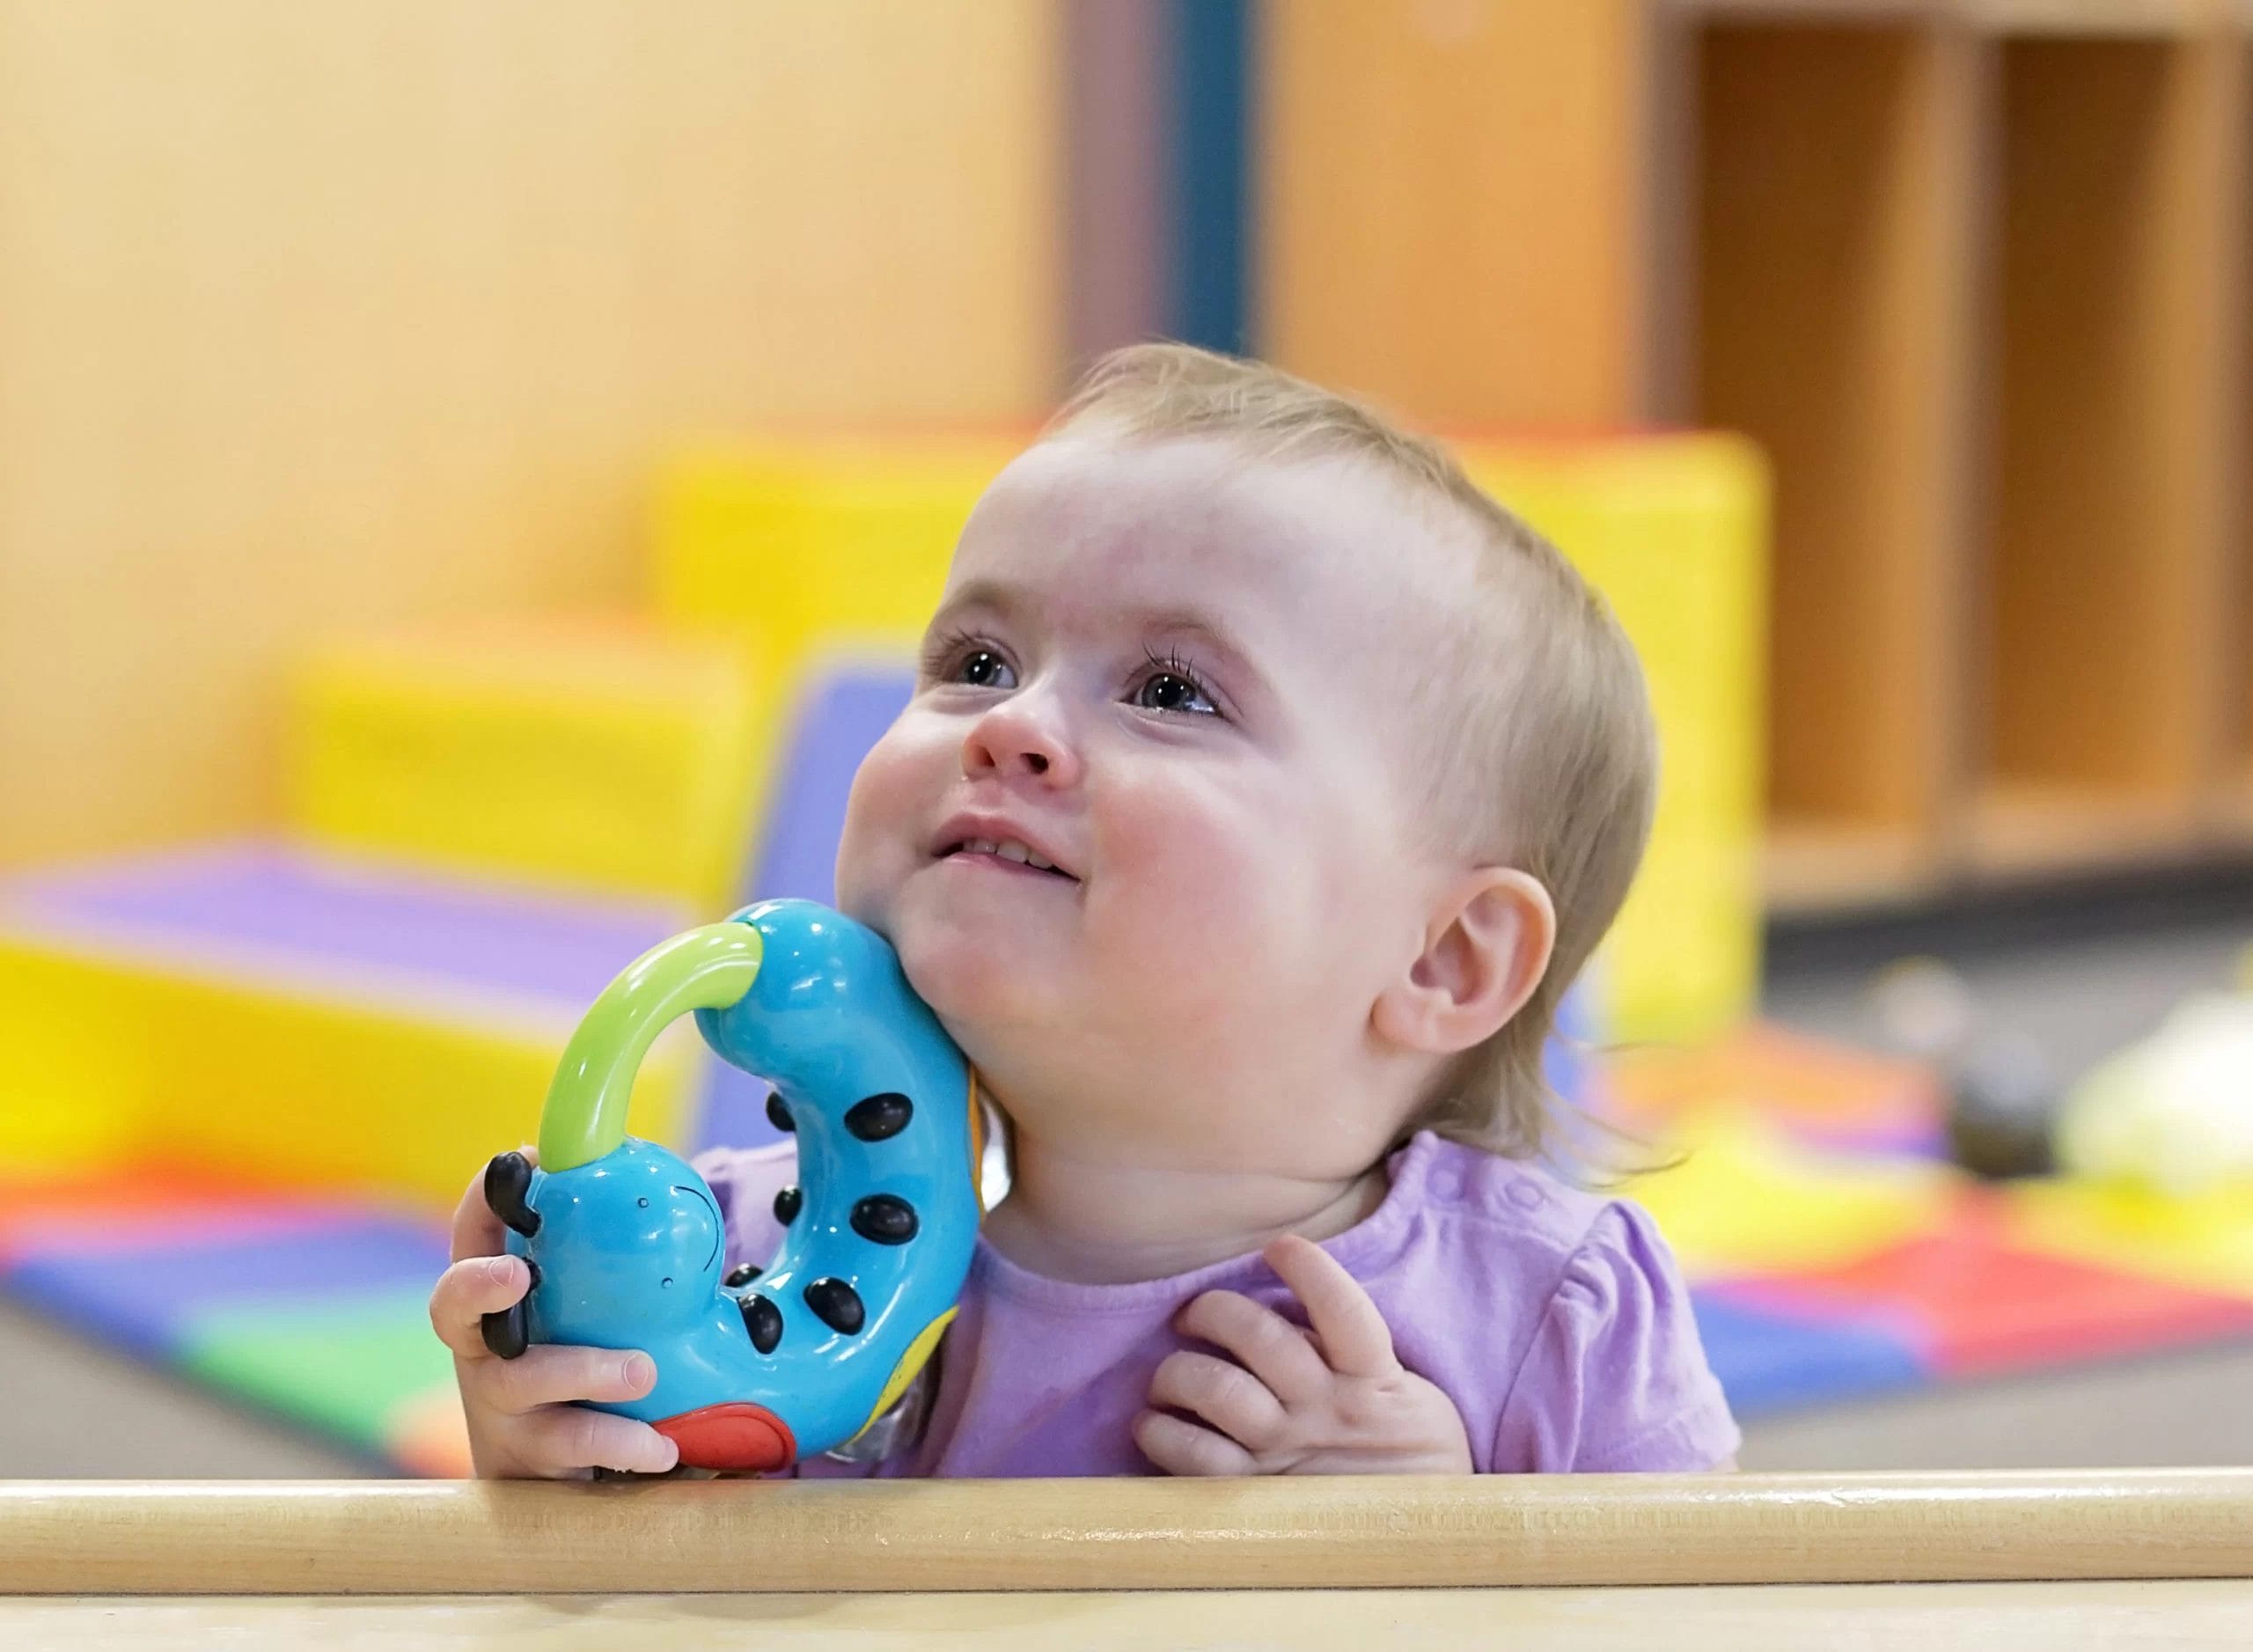 A baby with cerebral palsy playing with a toy in an early learning center.